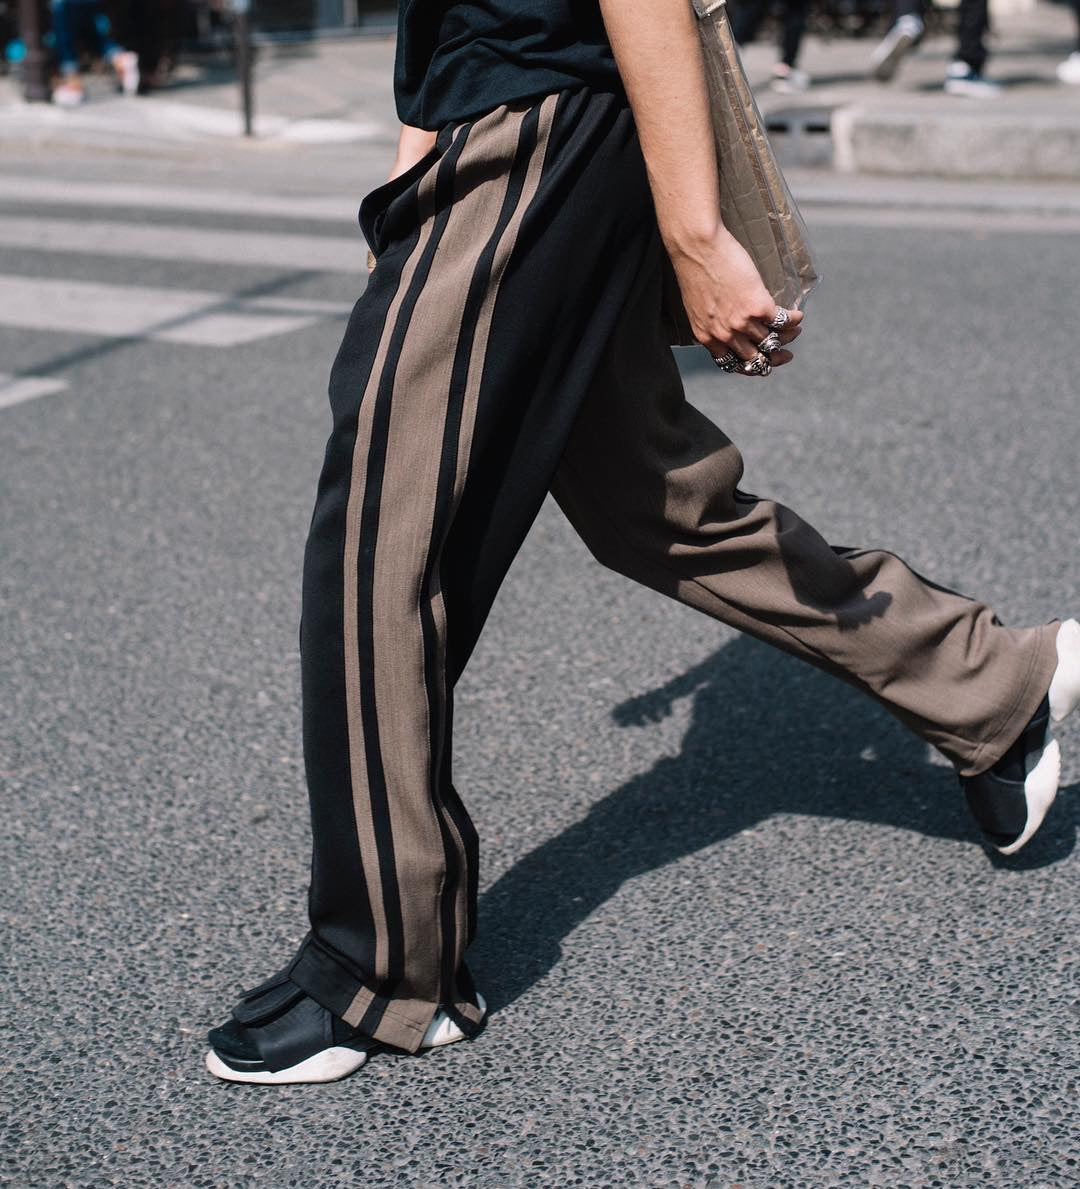 Women Solid Black Two Tone Side Stripe Trackpant